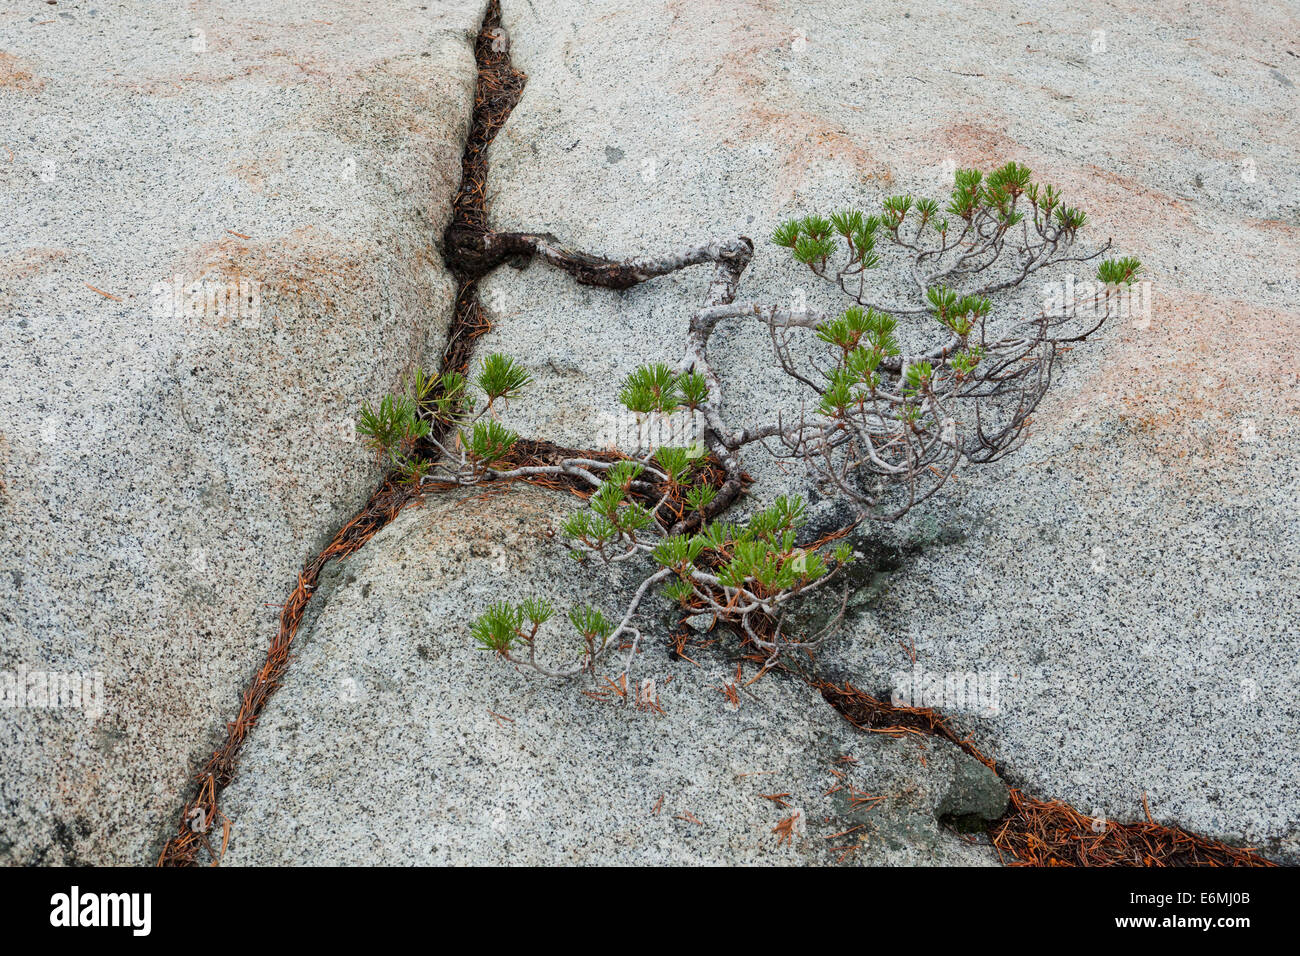 Young Ponderosa Pine (Pinus ponderosa), growing in a crack of a boulder, in the Sierra Nevada mountain range - California USA Stock Photo